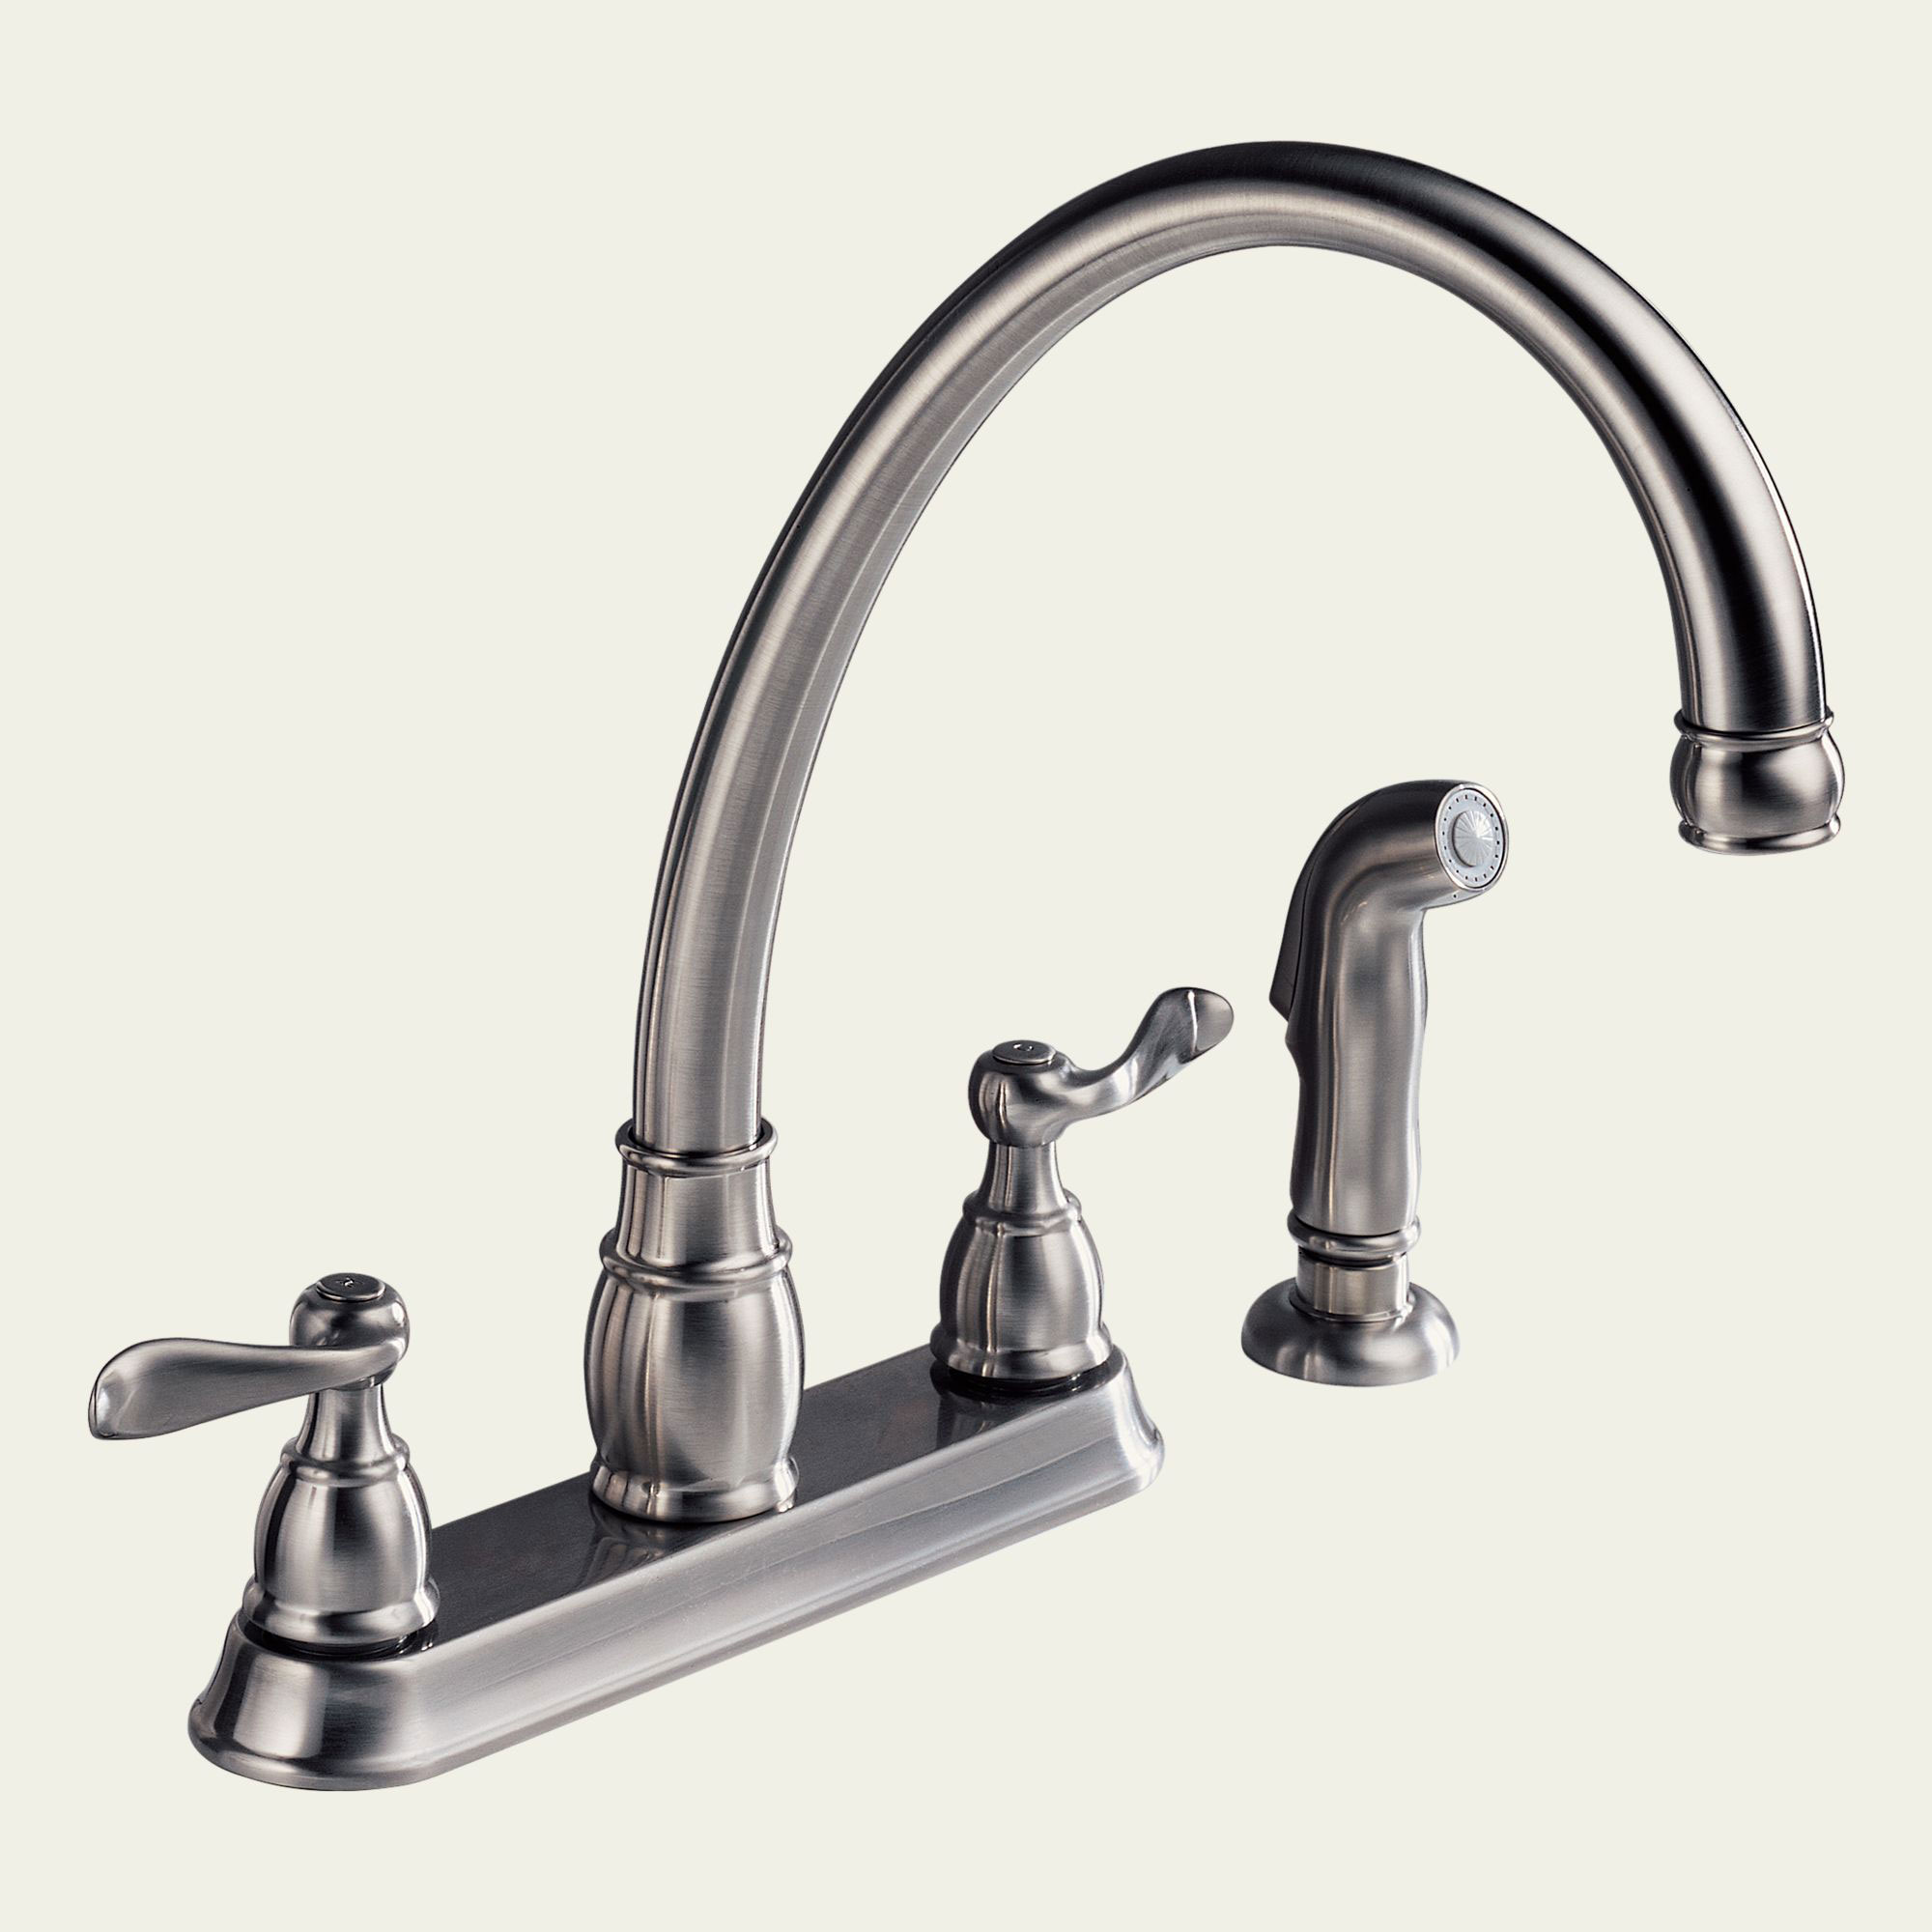 Peerless Lead Free 2-Handle Chrome Kitchen Faucet and Side Spray